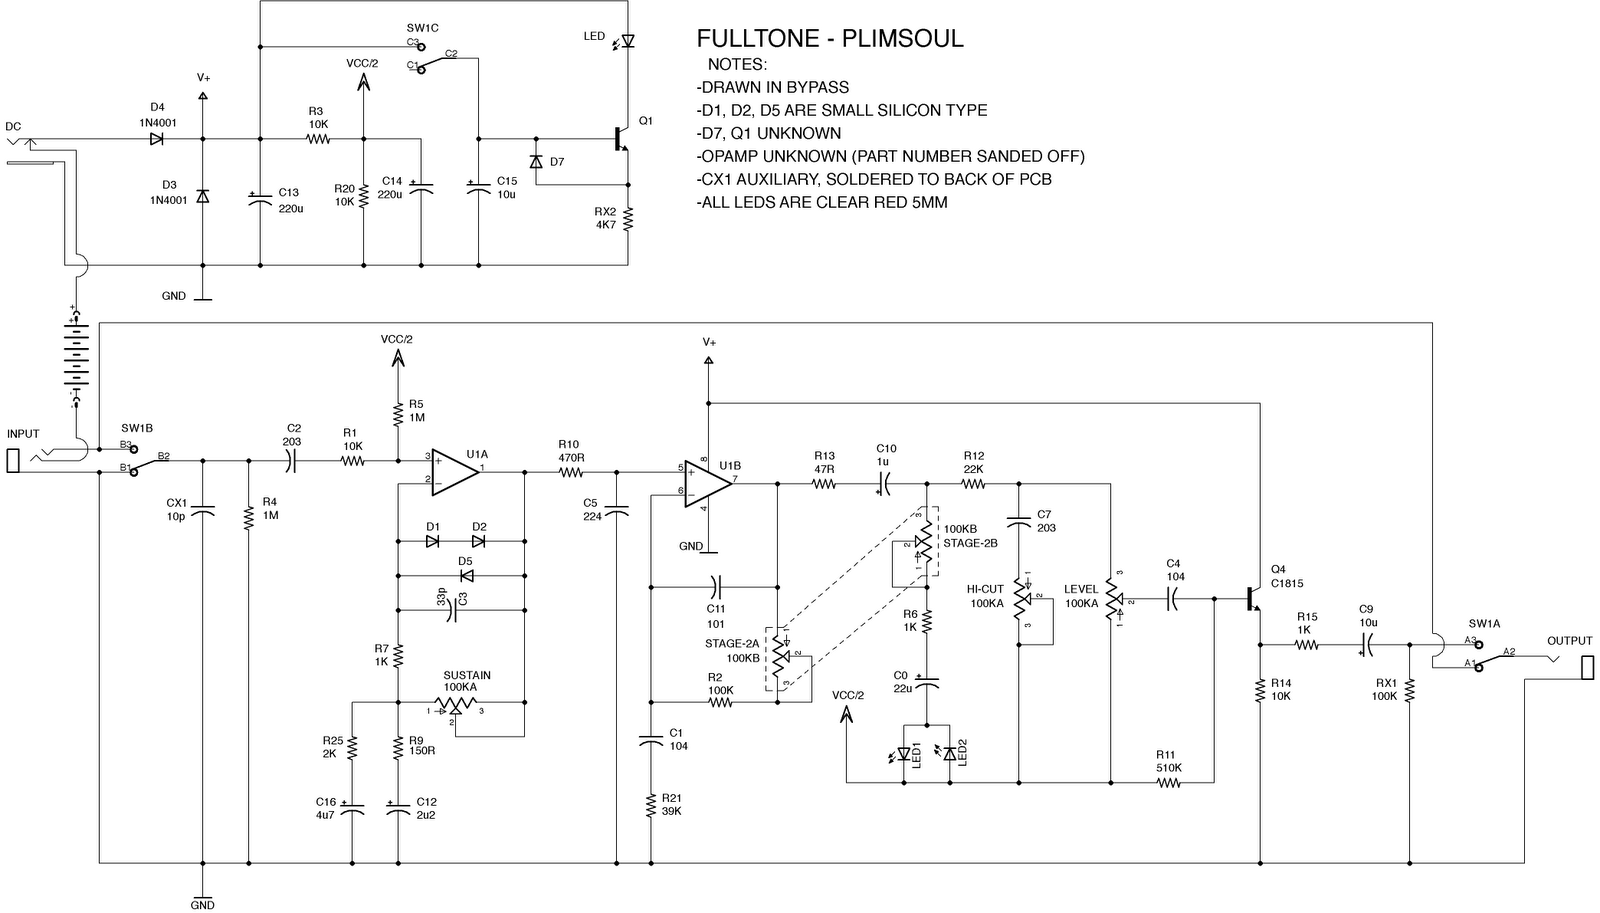 Plimsoul Schematic, As You Can See The Dual Ganged Pot Simultanously Increased The Gain In The Second Opamp Stage While Lowering The Resistance In Series With Those Leds Used, Plimsoul Schematic